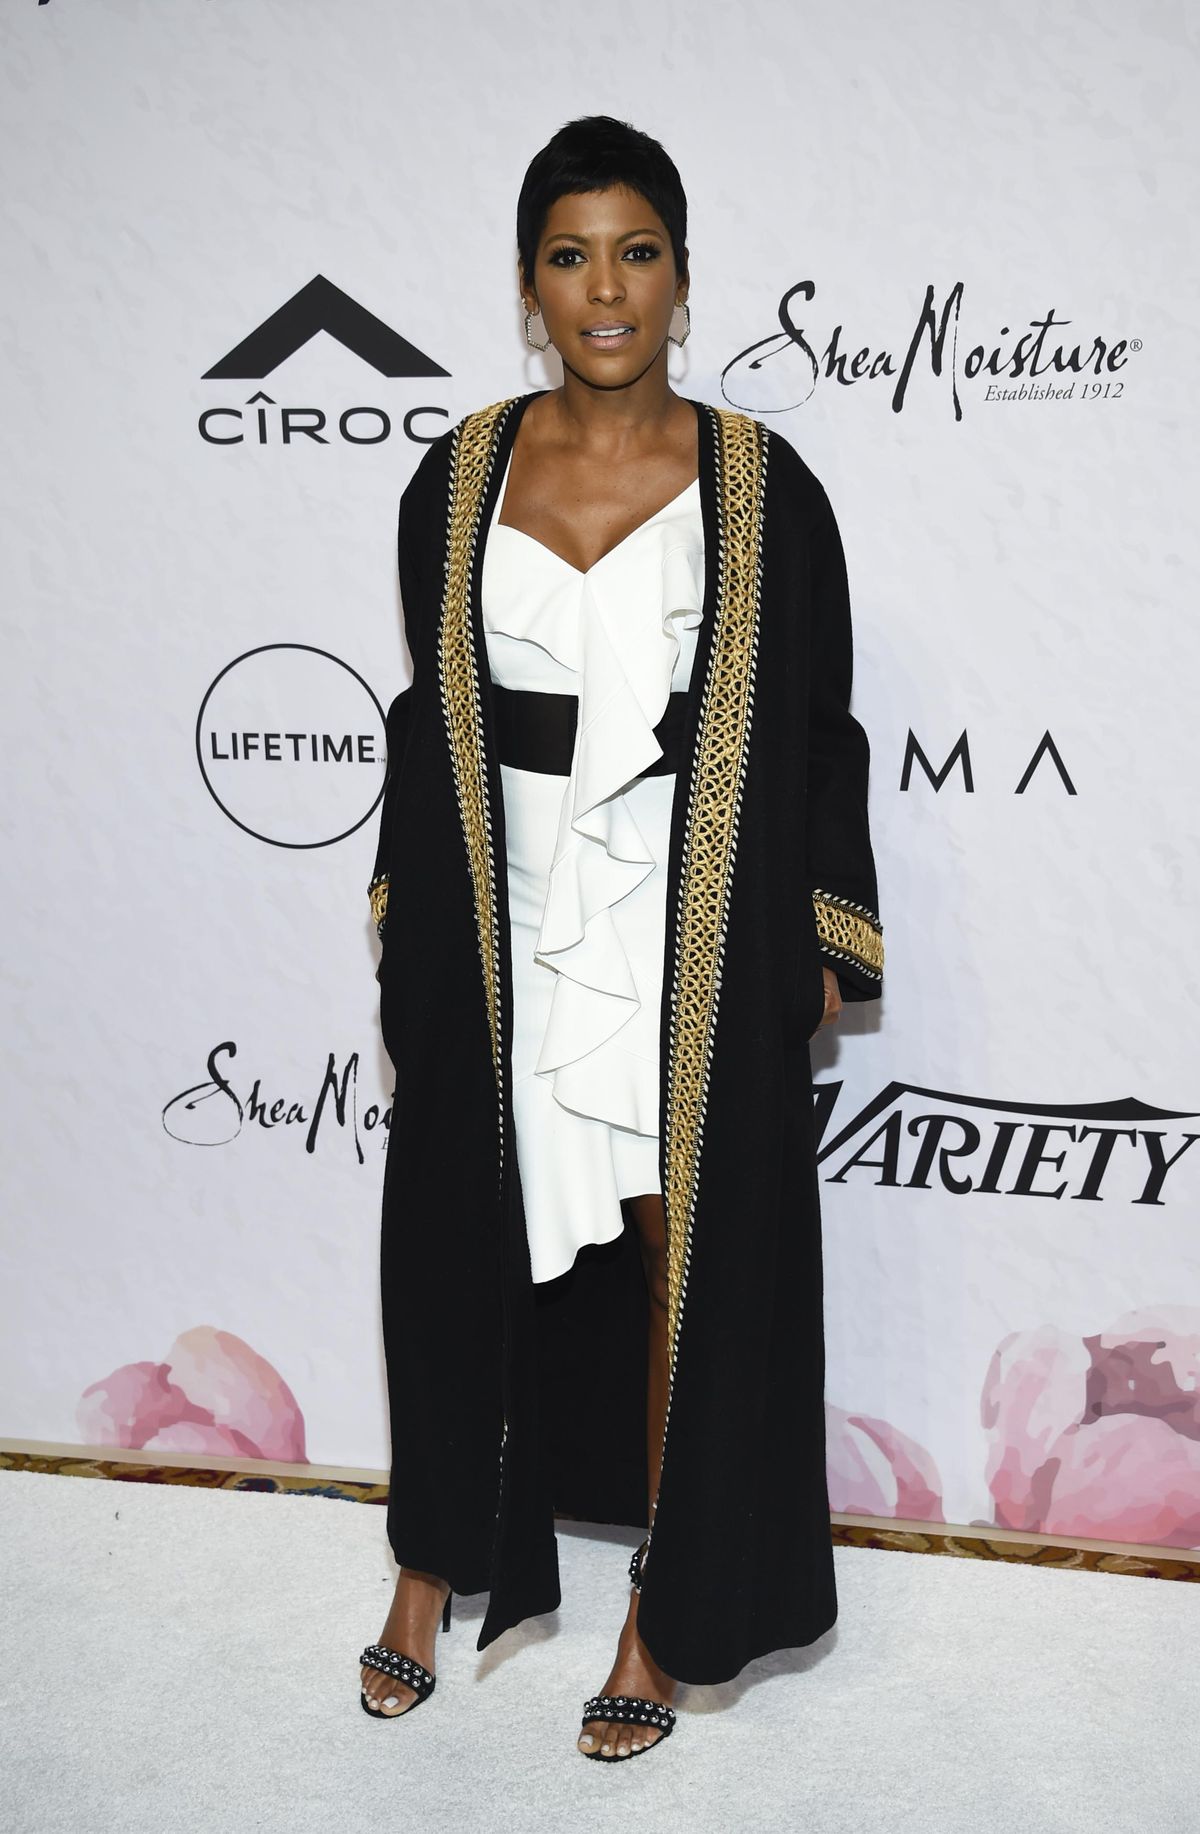 Honoree Tamron Hall attends Variety’s Power of Women: New York event at Cipriani Wall Street on Friday, April 13, 2018, in New York. (Evan Agostini / Invision)